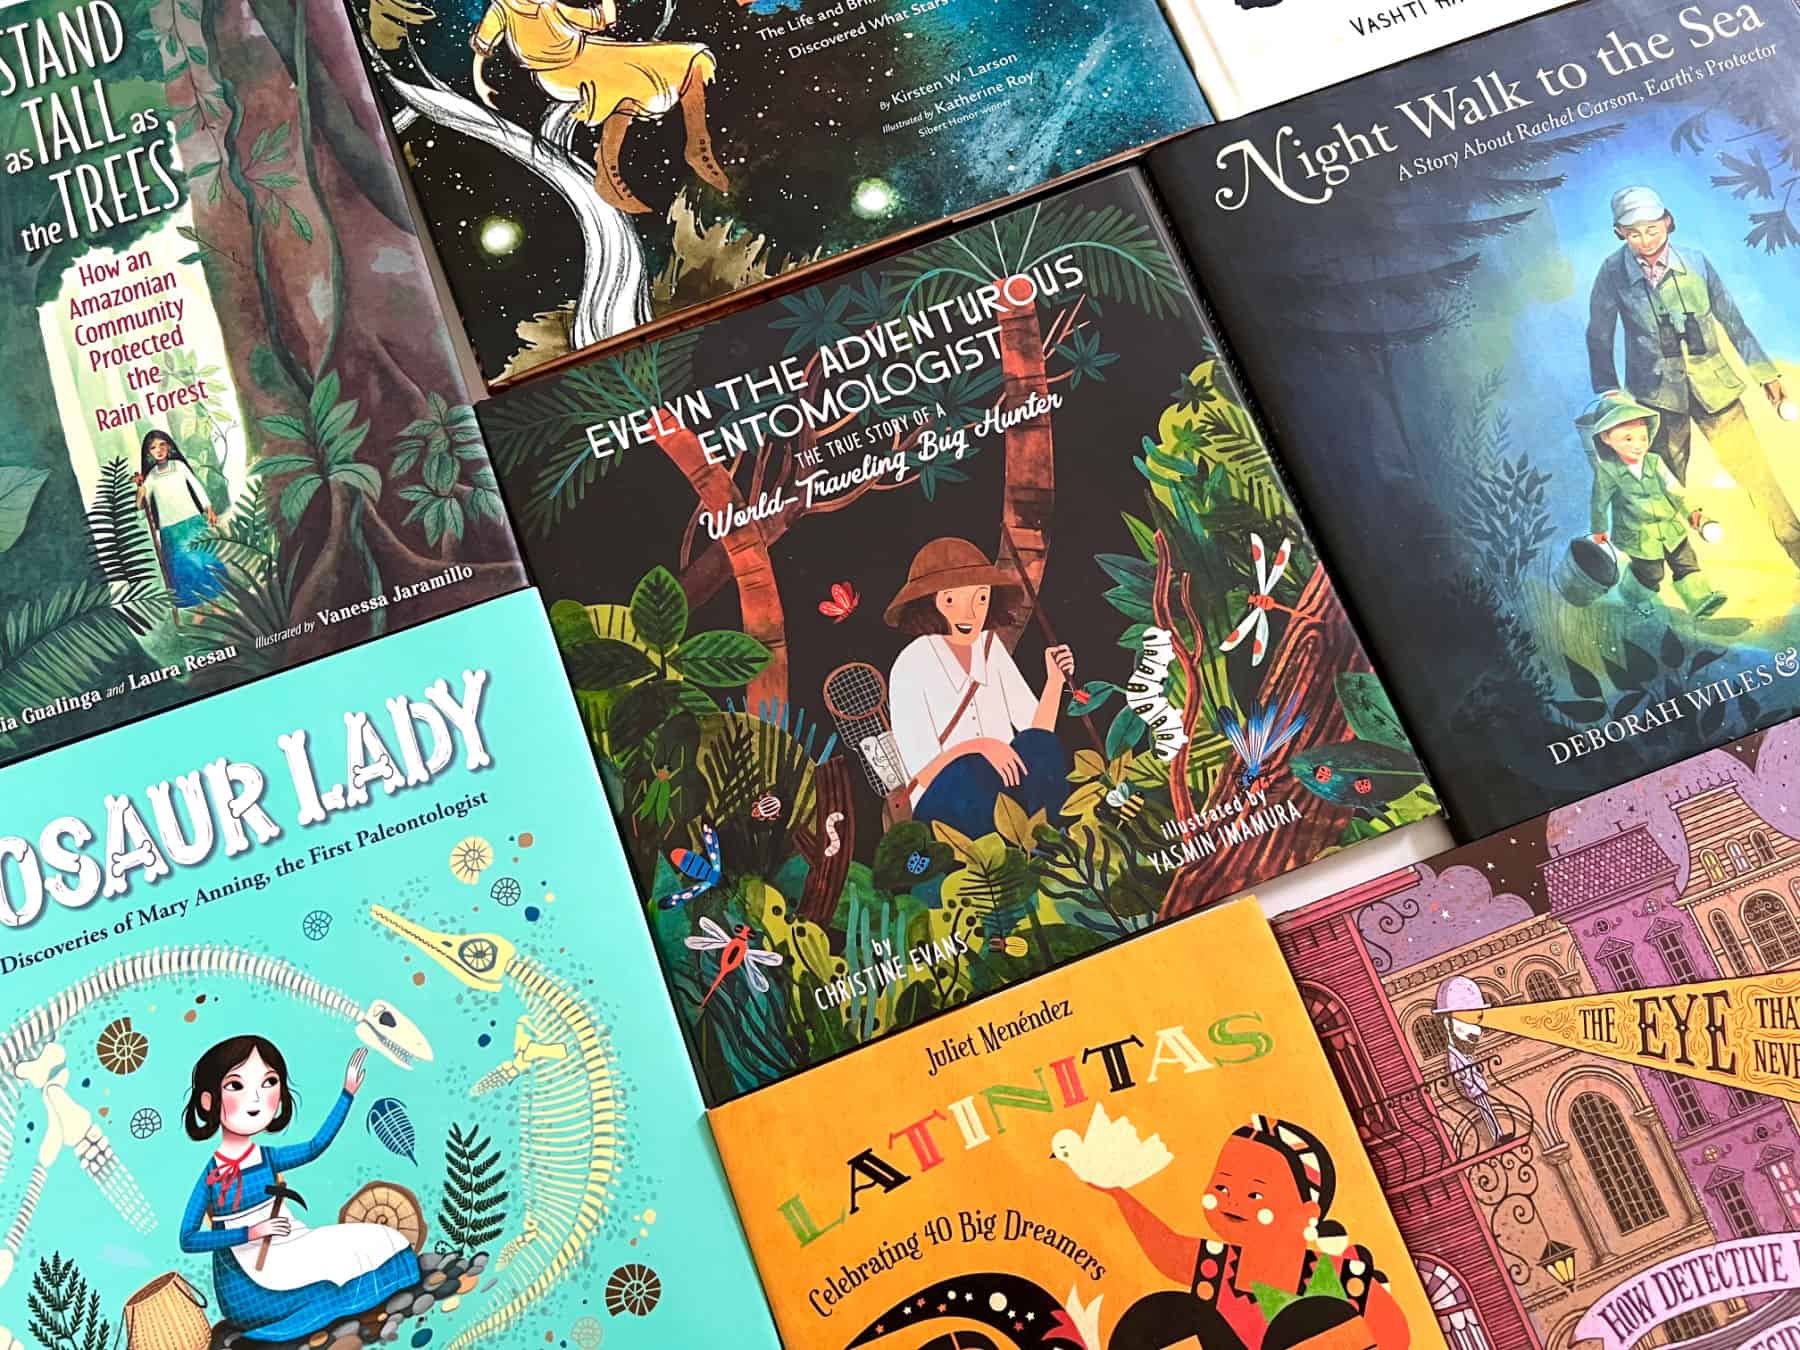 Women's History Month Books for Kids